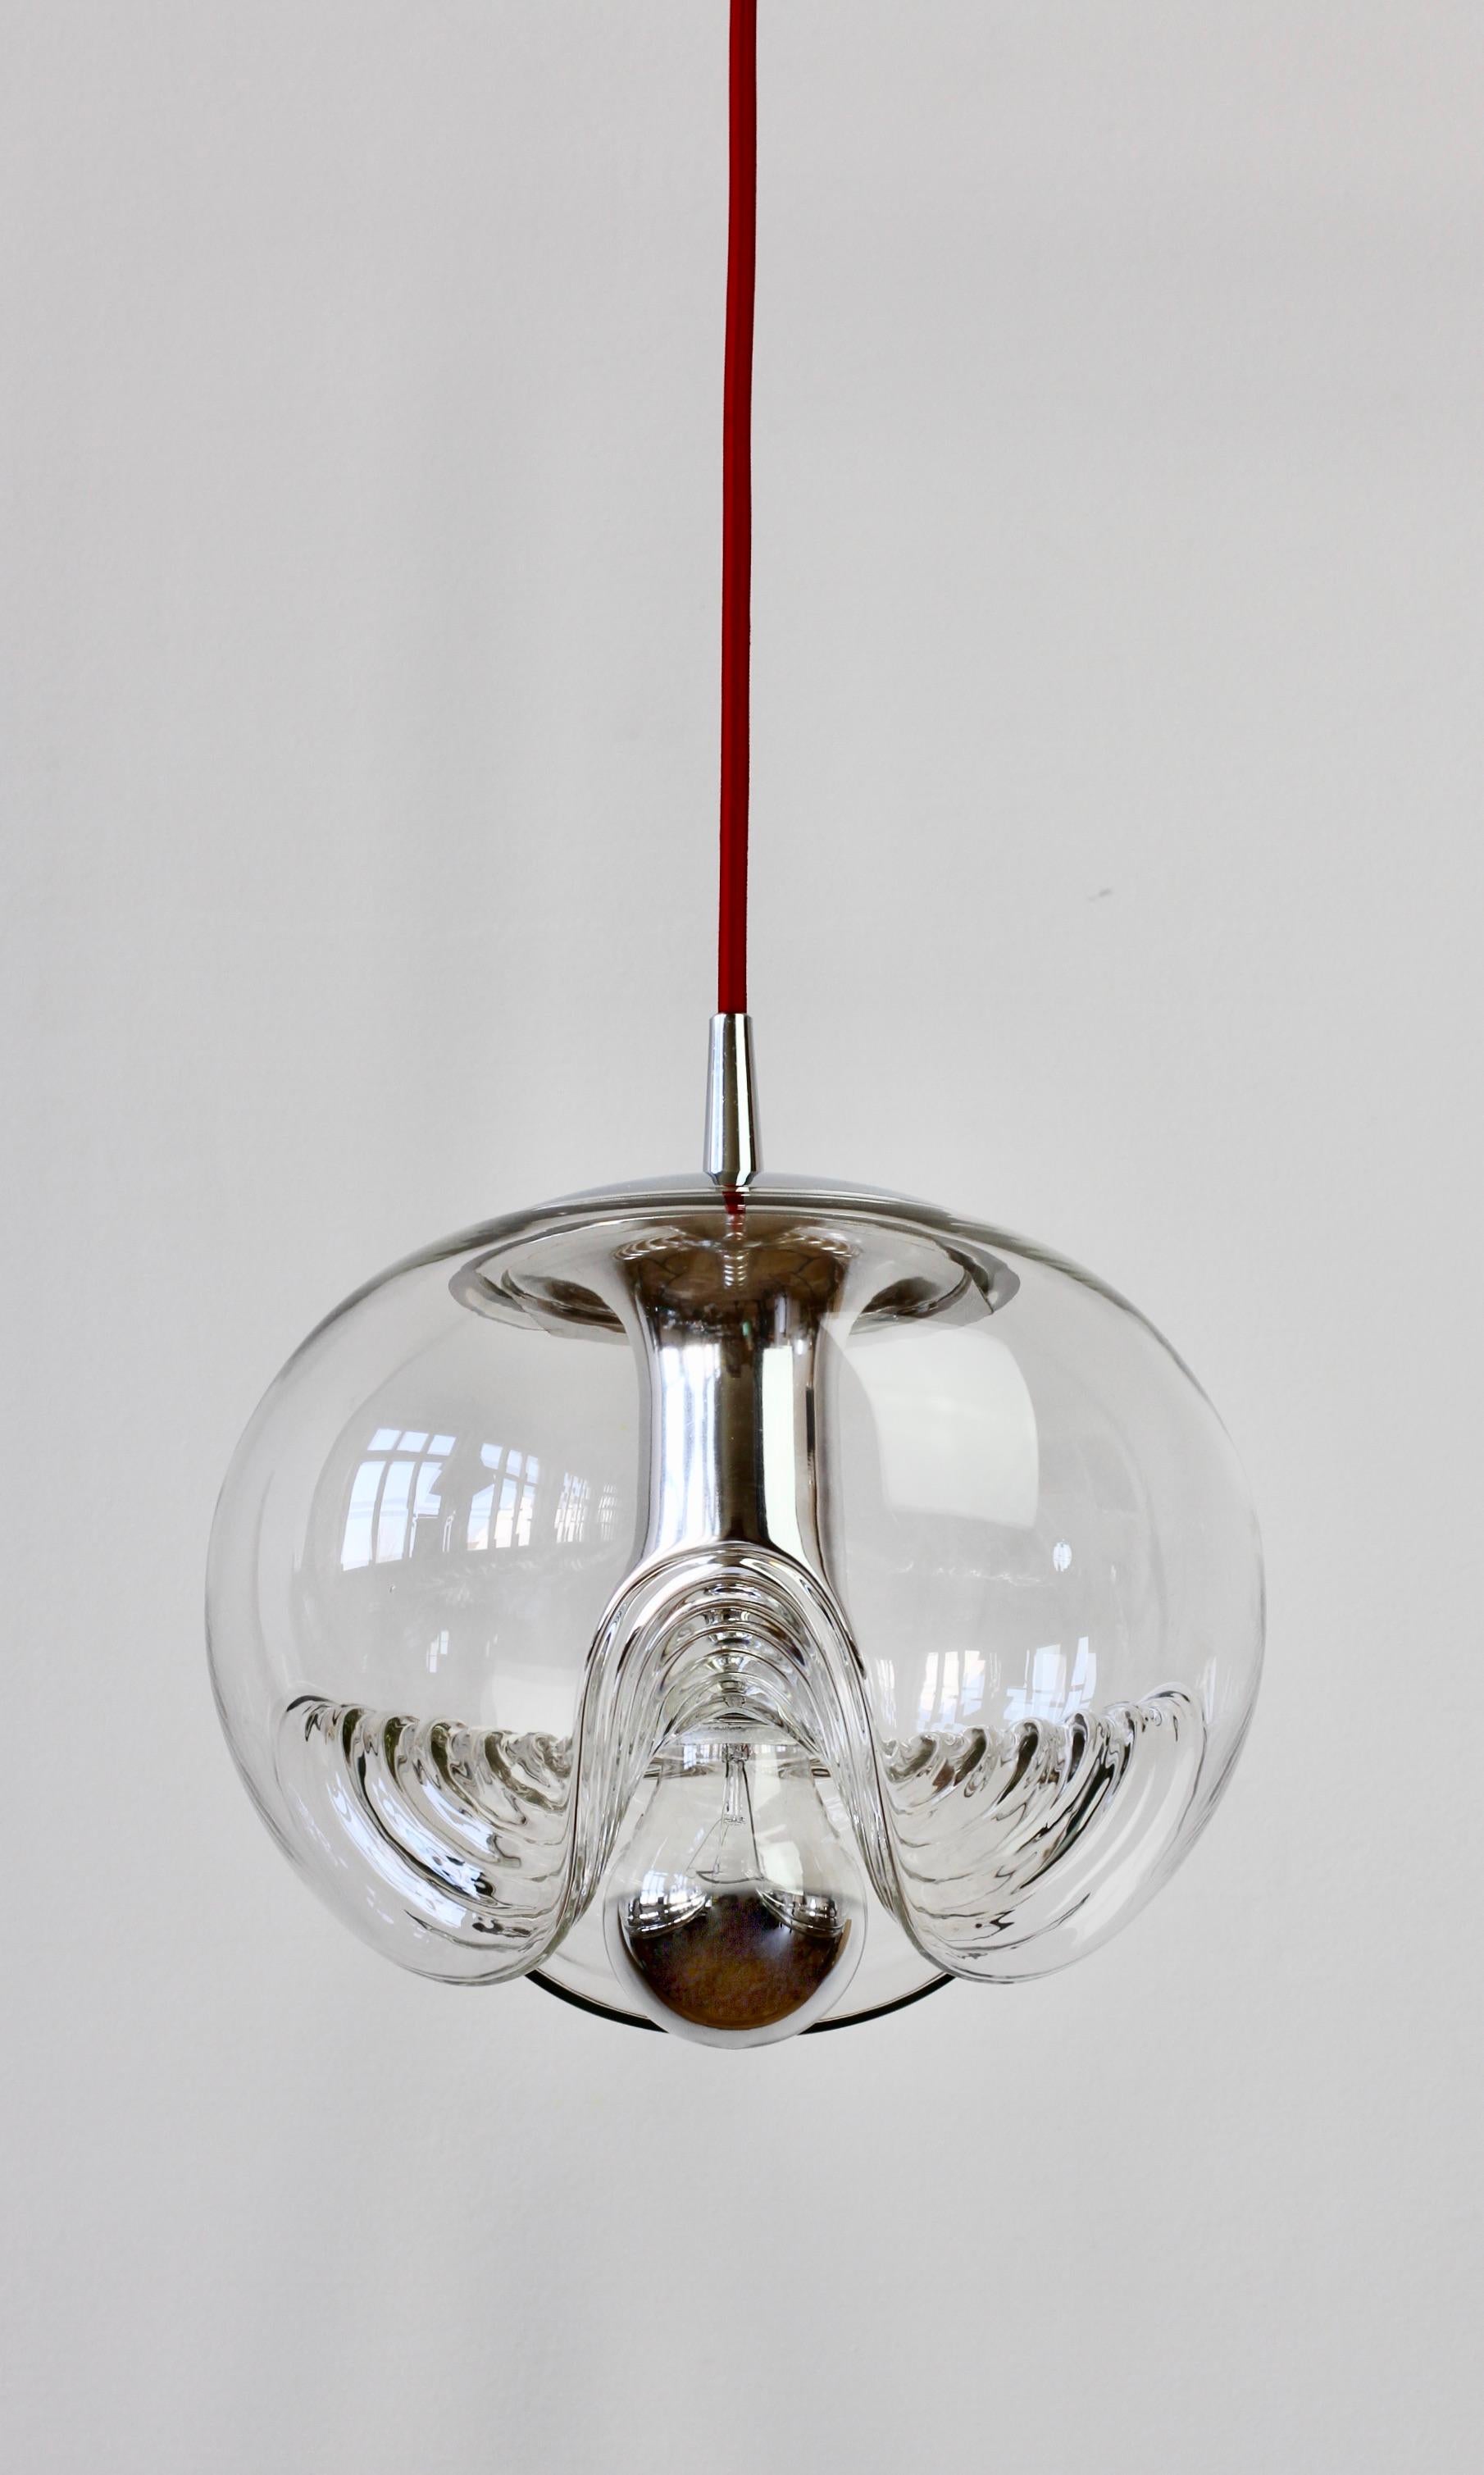 One of a set of five vintage midcentury pendant lights / lamp fixtures designed by Peill and Putzler in the 1970s. This is an absolutely Classic piece of design - often referred to as 